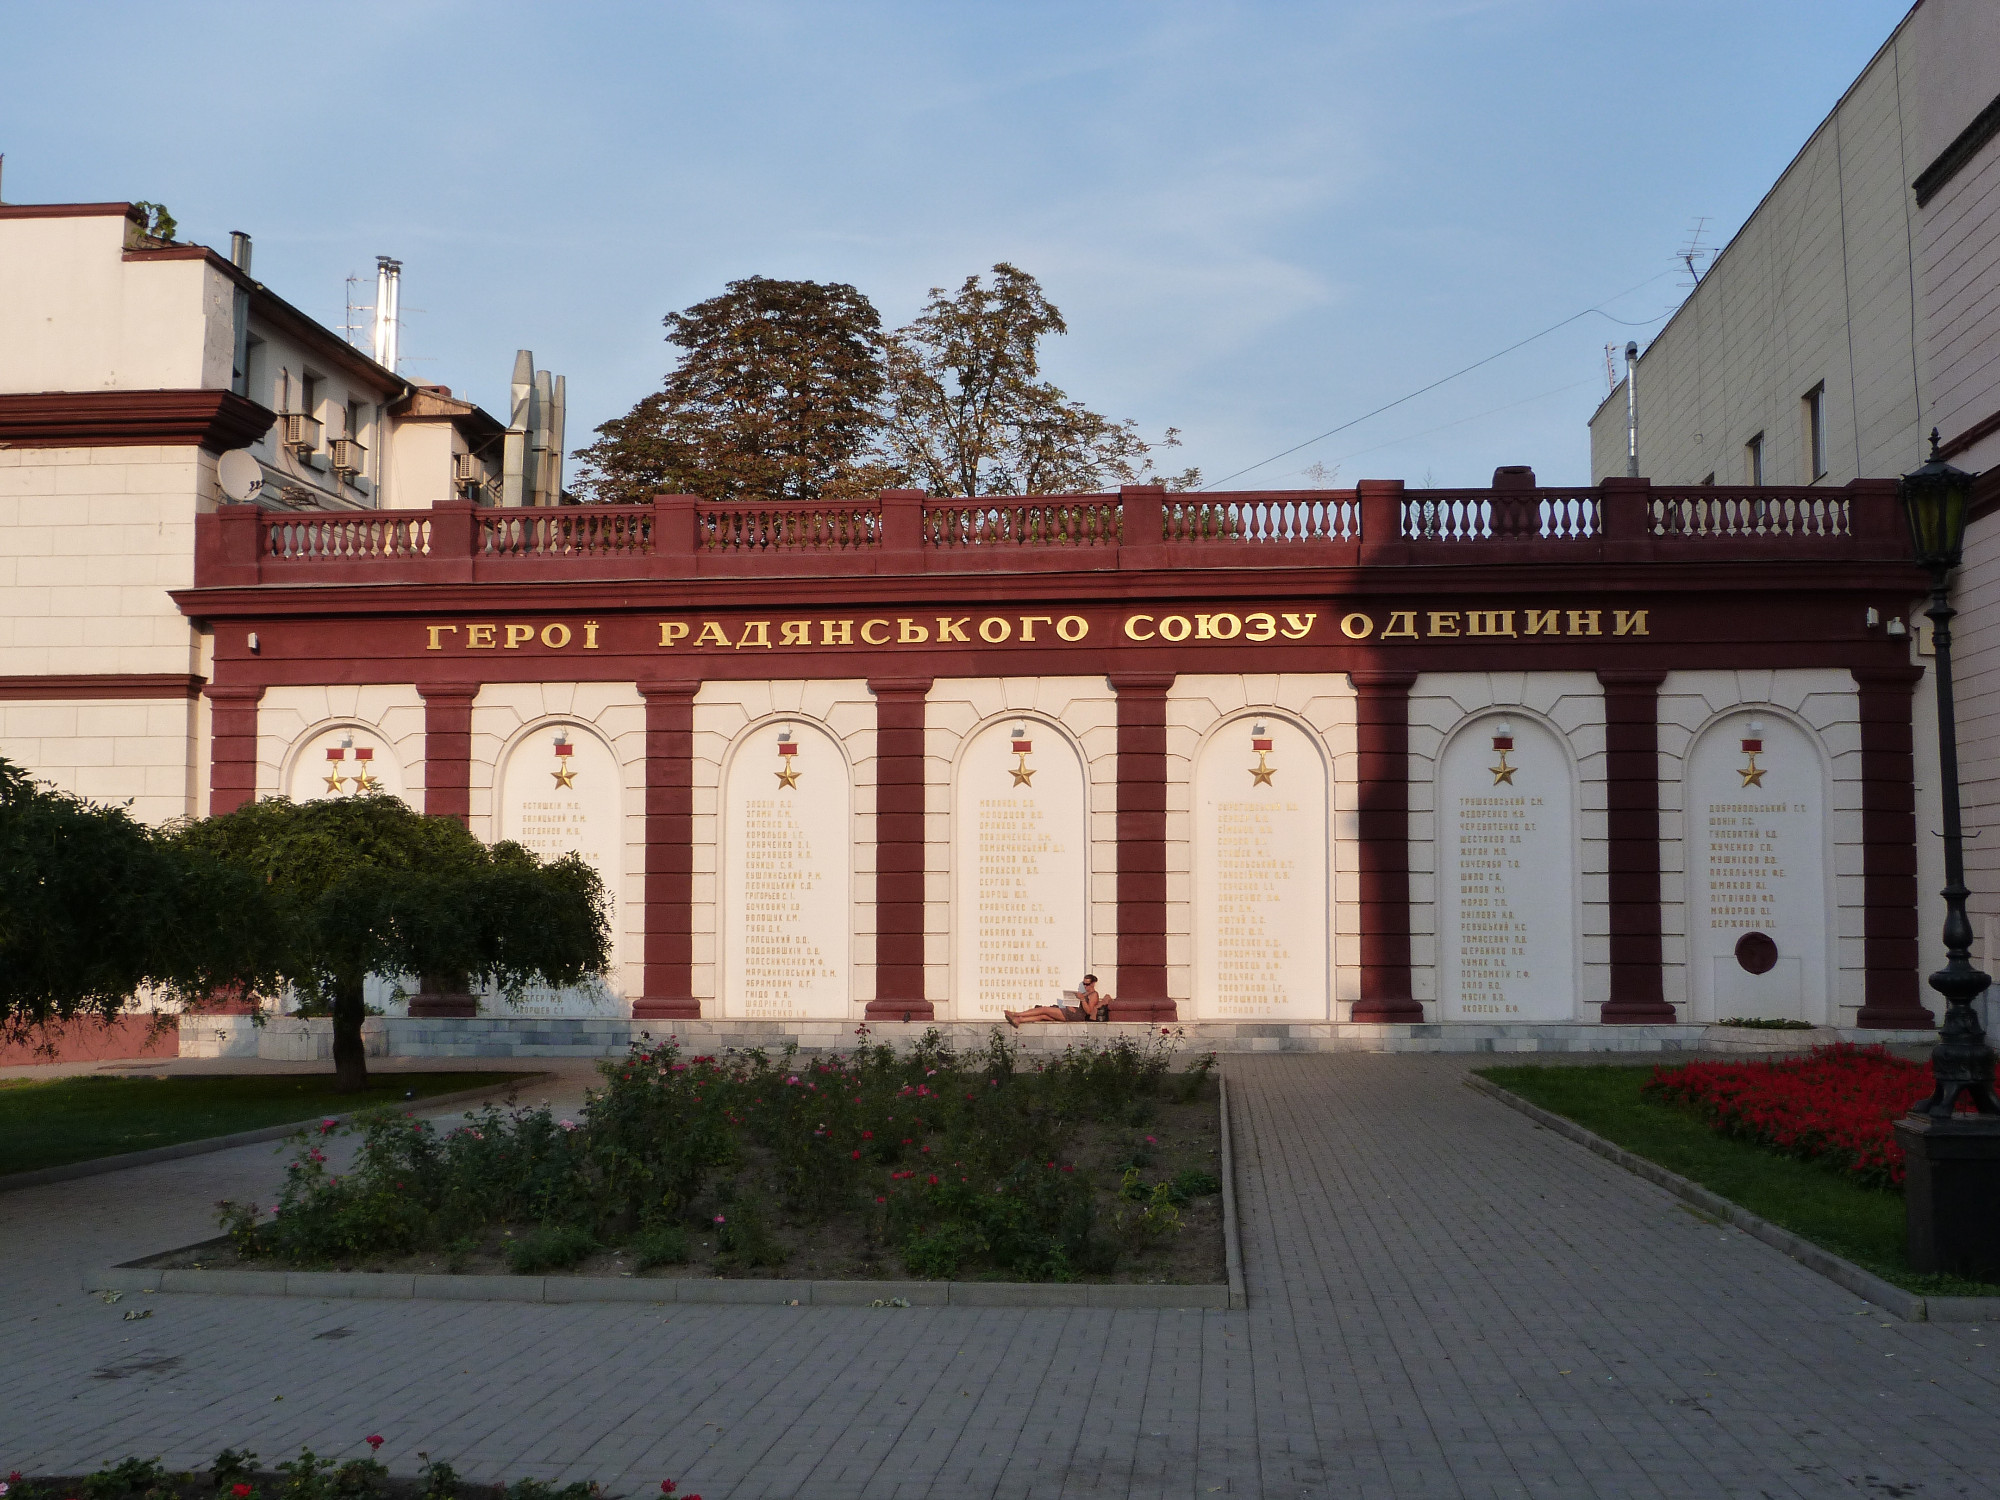 Memorial wall to the Heroes of the Soviet Union in Odessa